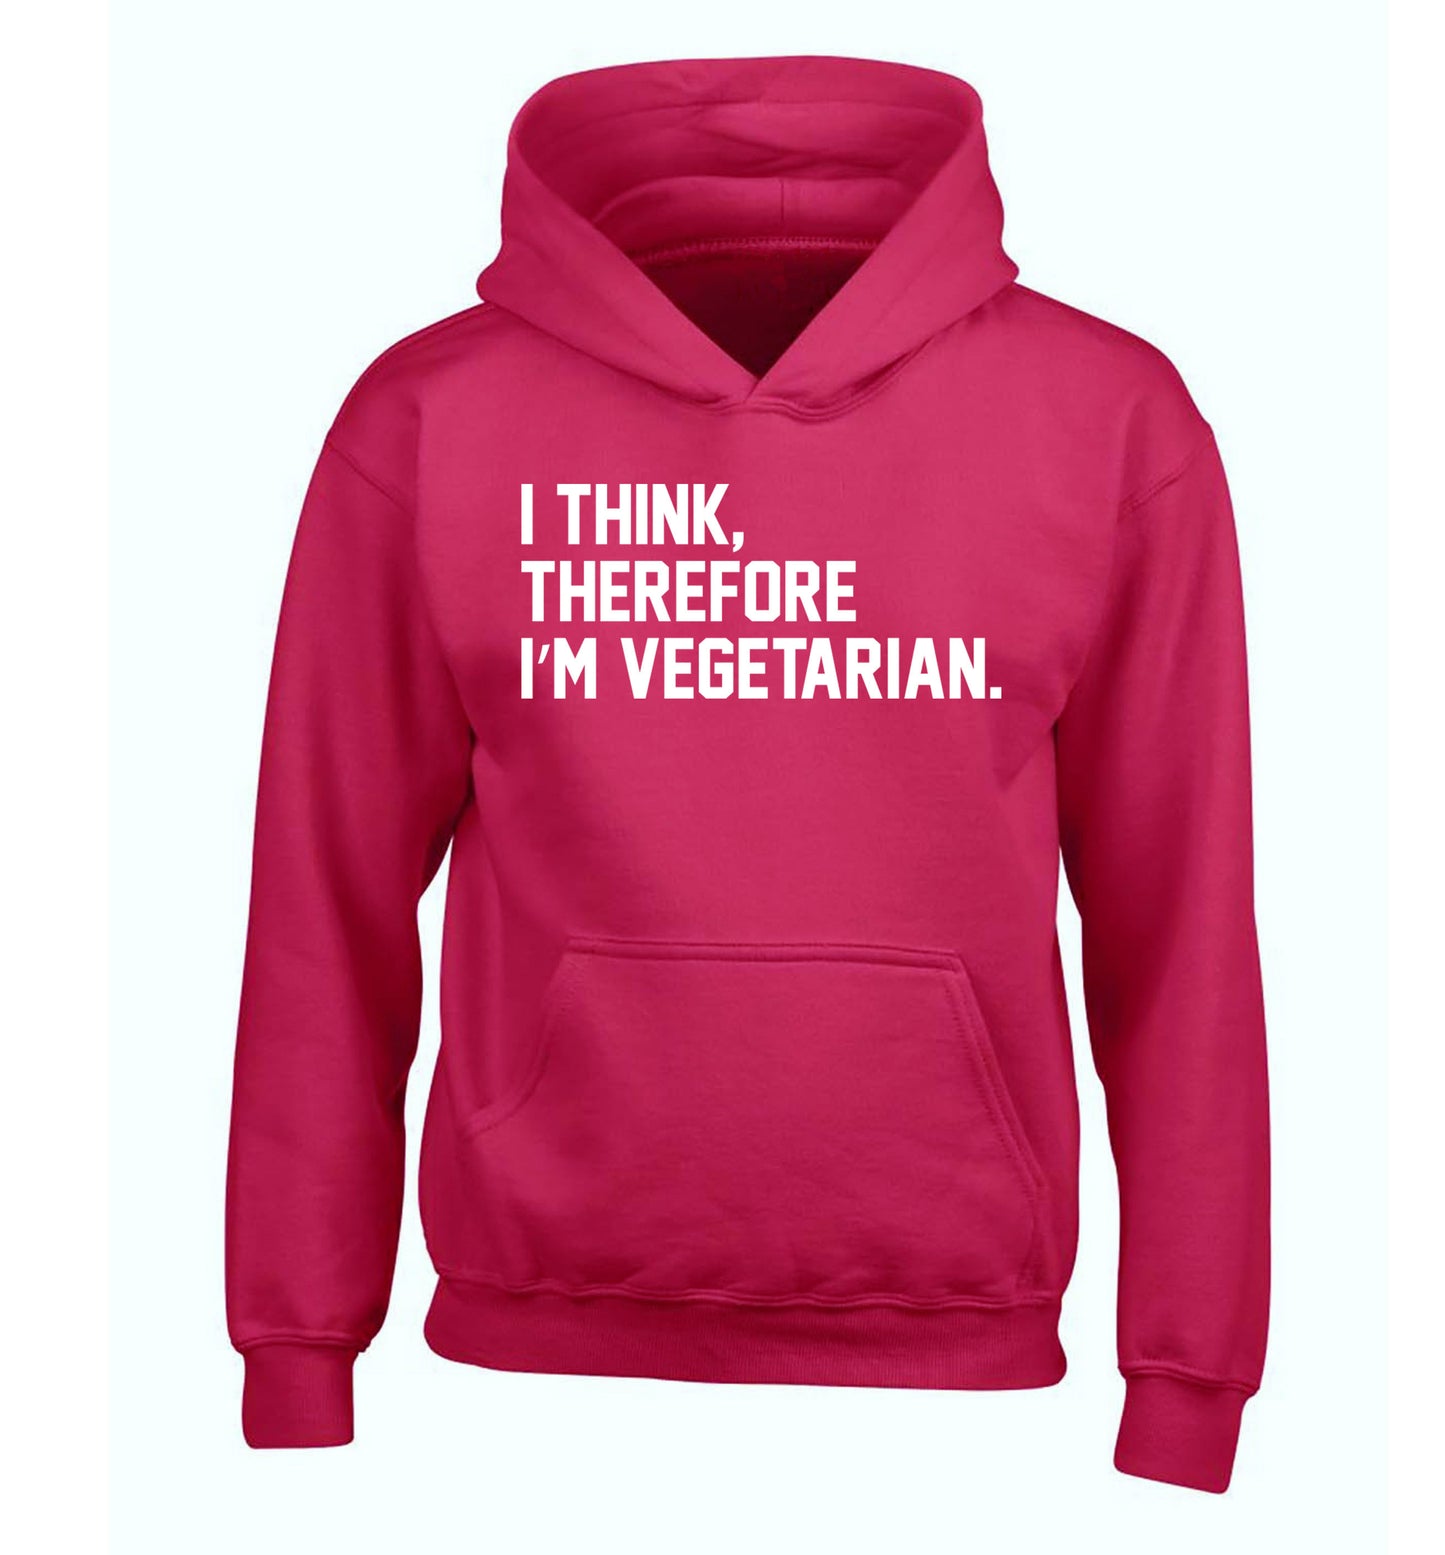 I think therefore I'm vegetarian children's pink hoodie 12-14 Years